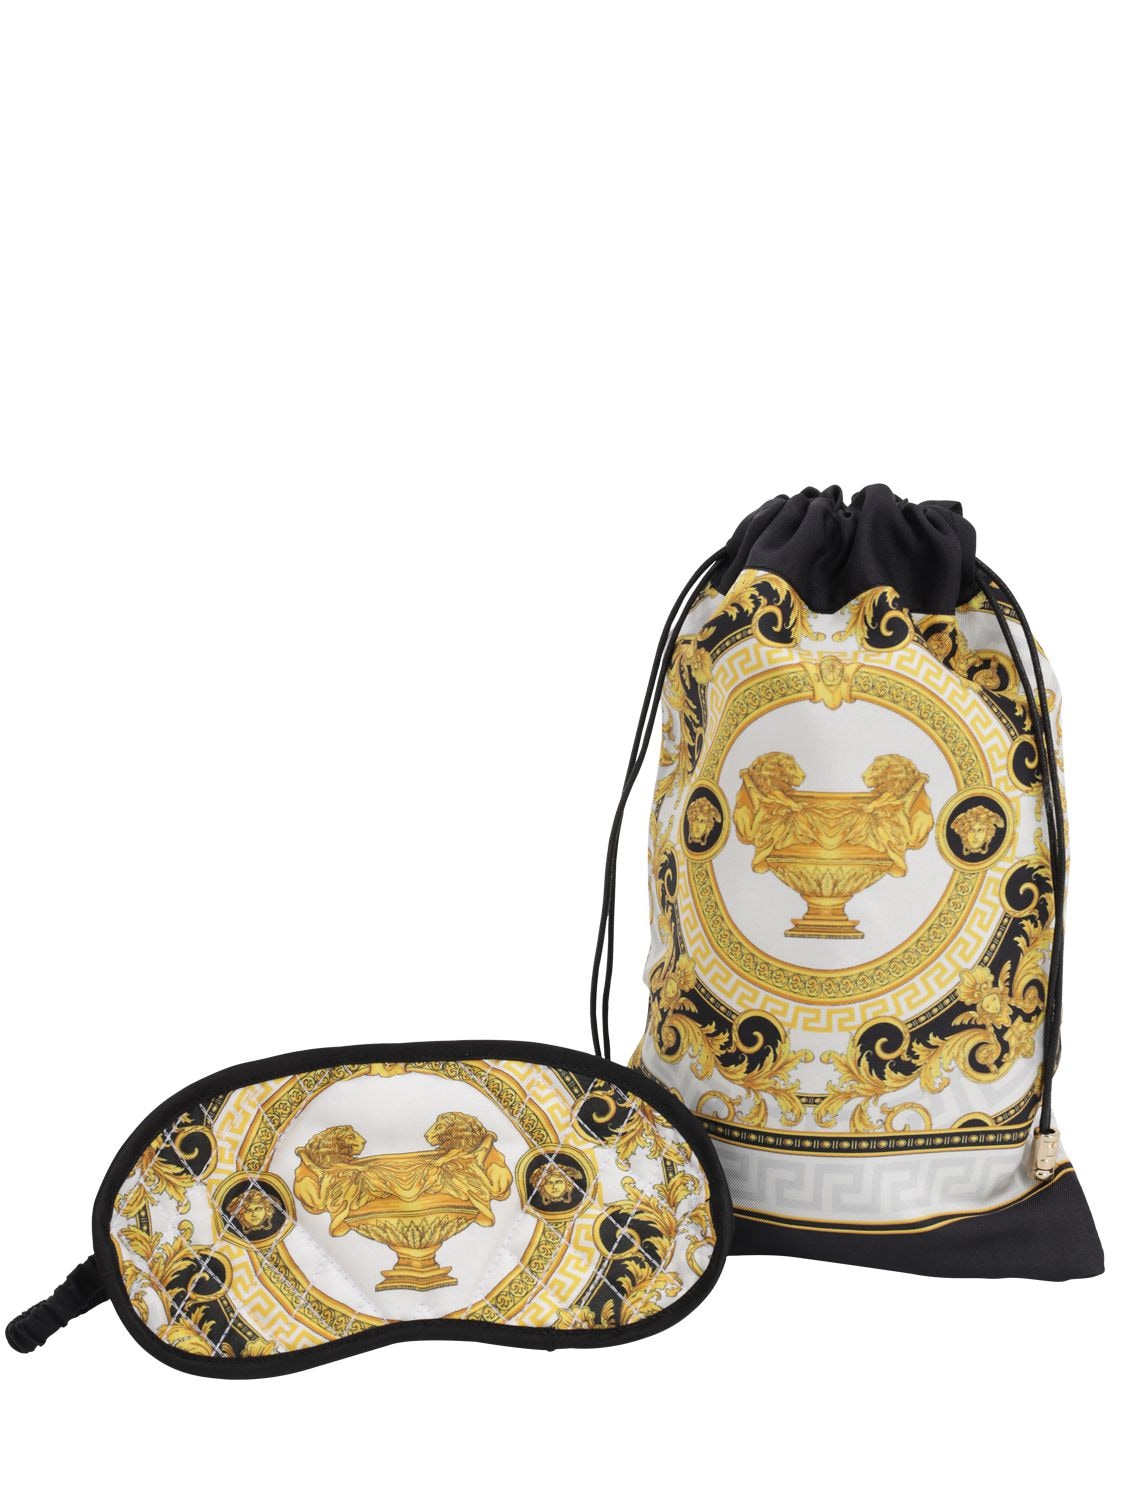 Versace Barocco & Dressing Gown Silk Eye Mask W/ Case In White,gold